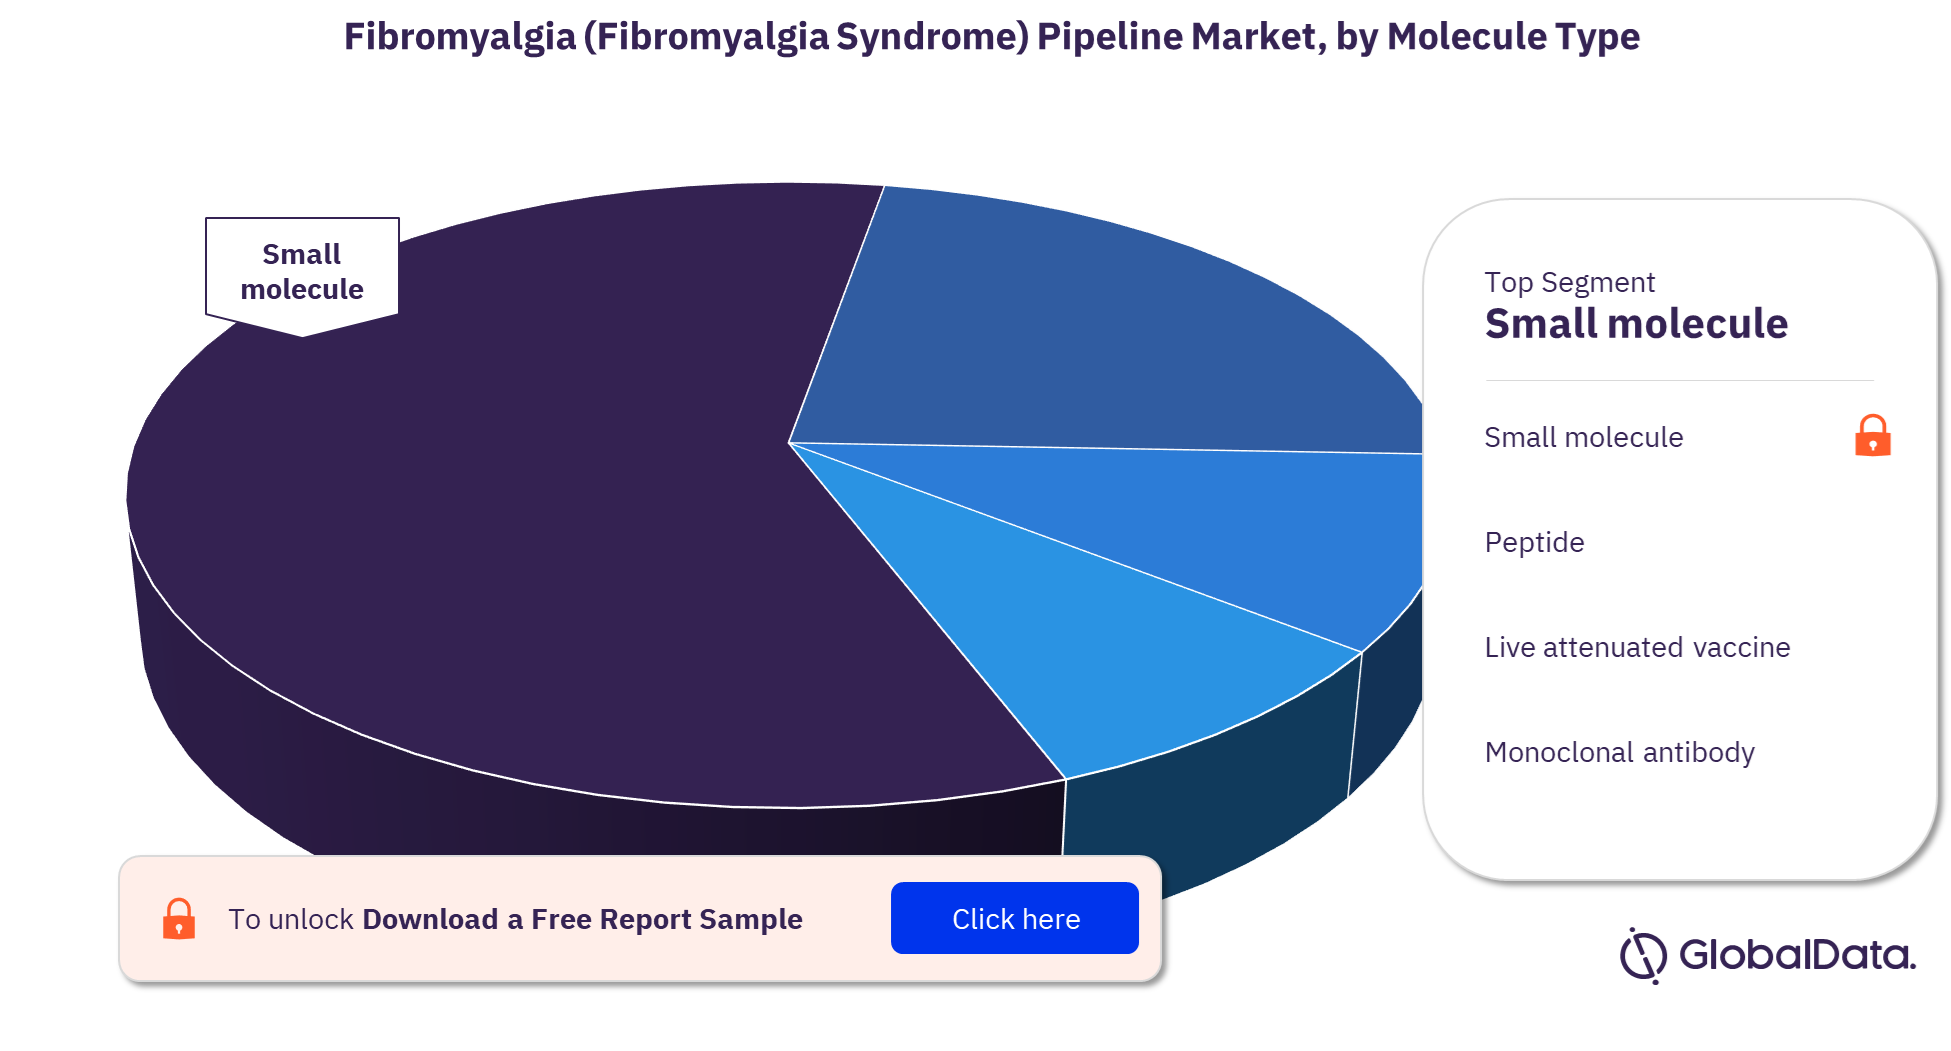 Fibromyalgia pipeline products market, by molecule type